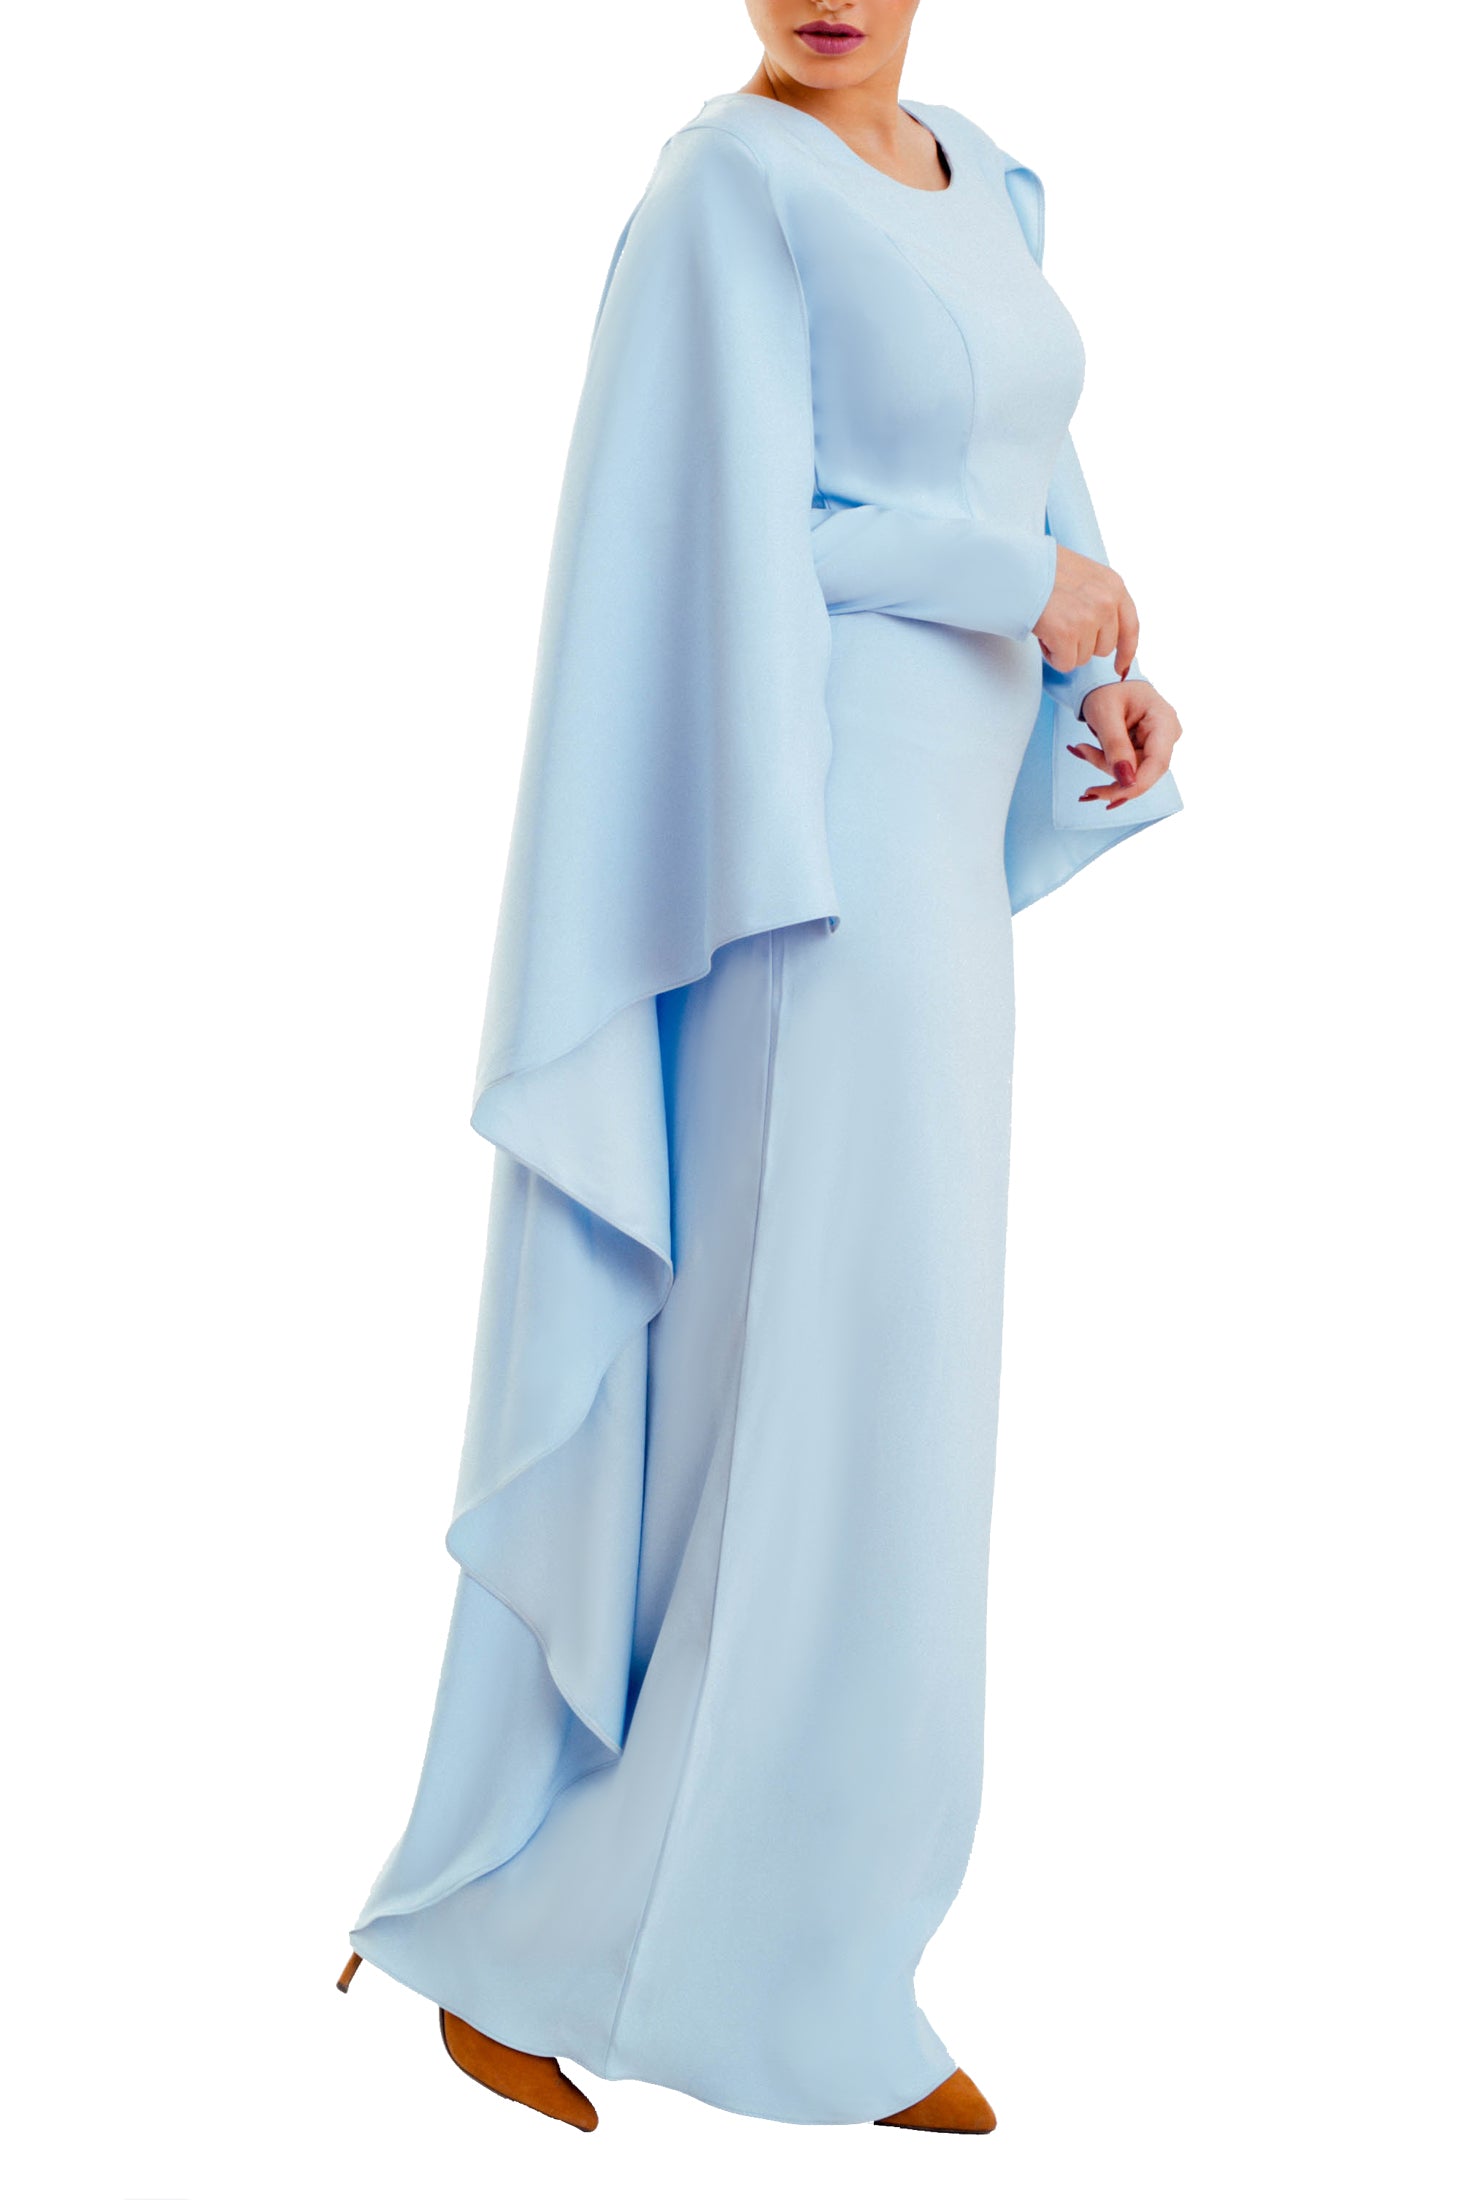 The Cape Dress - Baby Blue